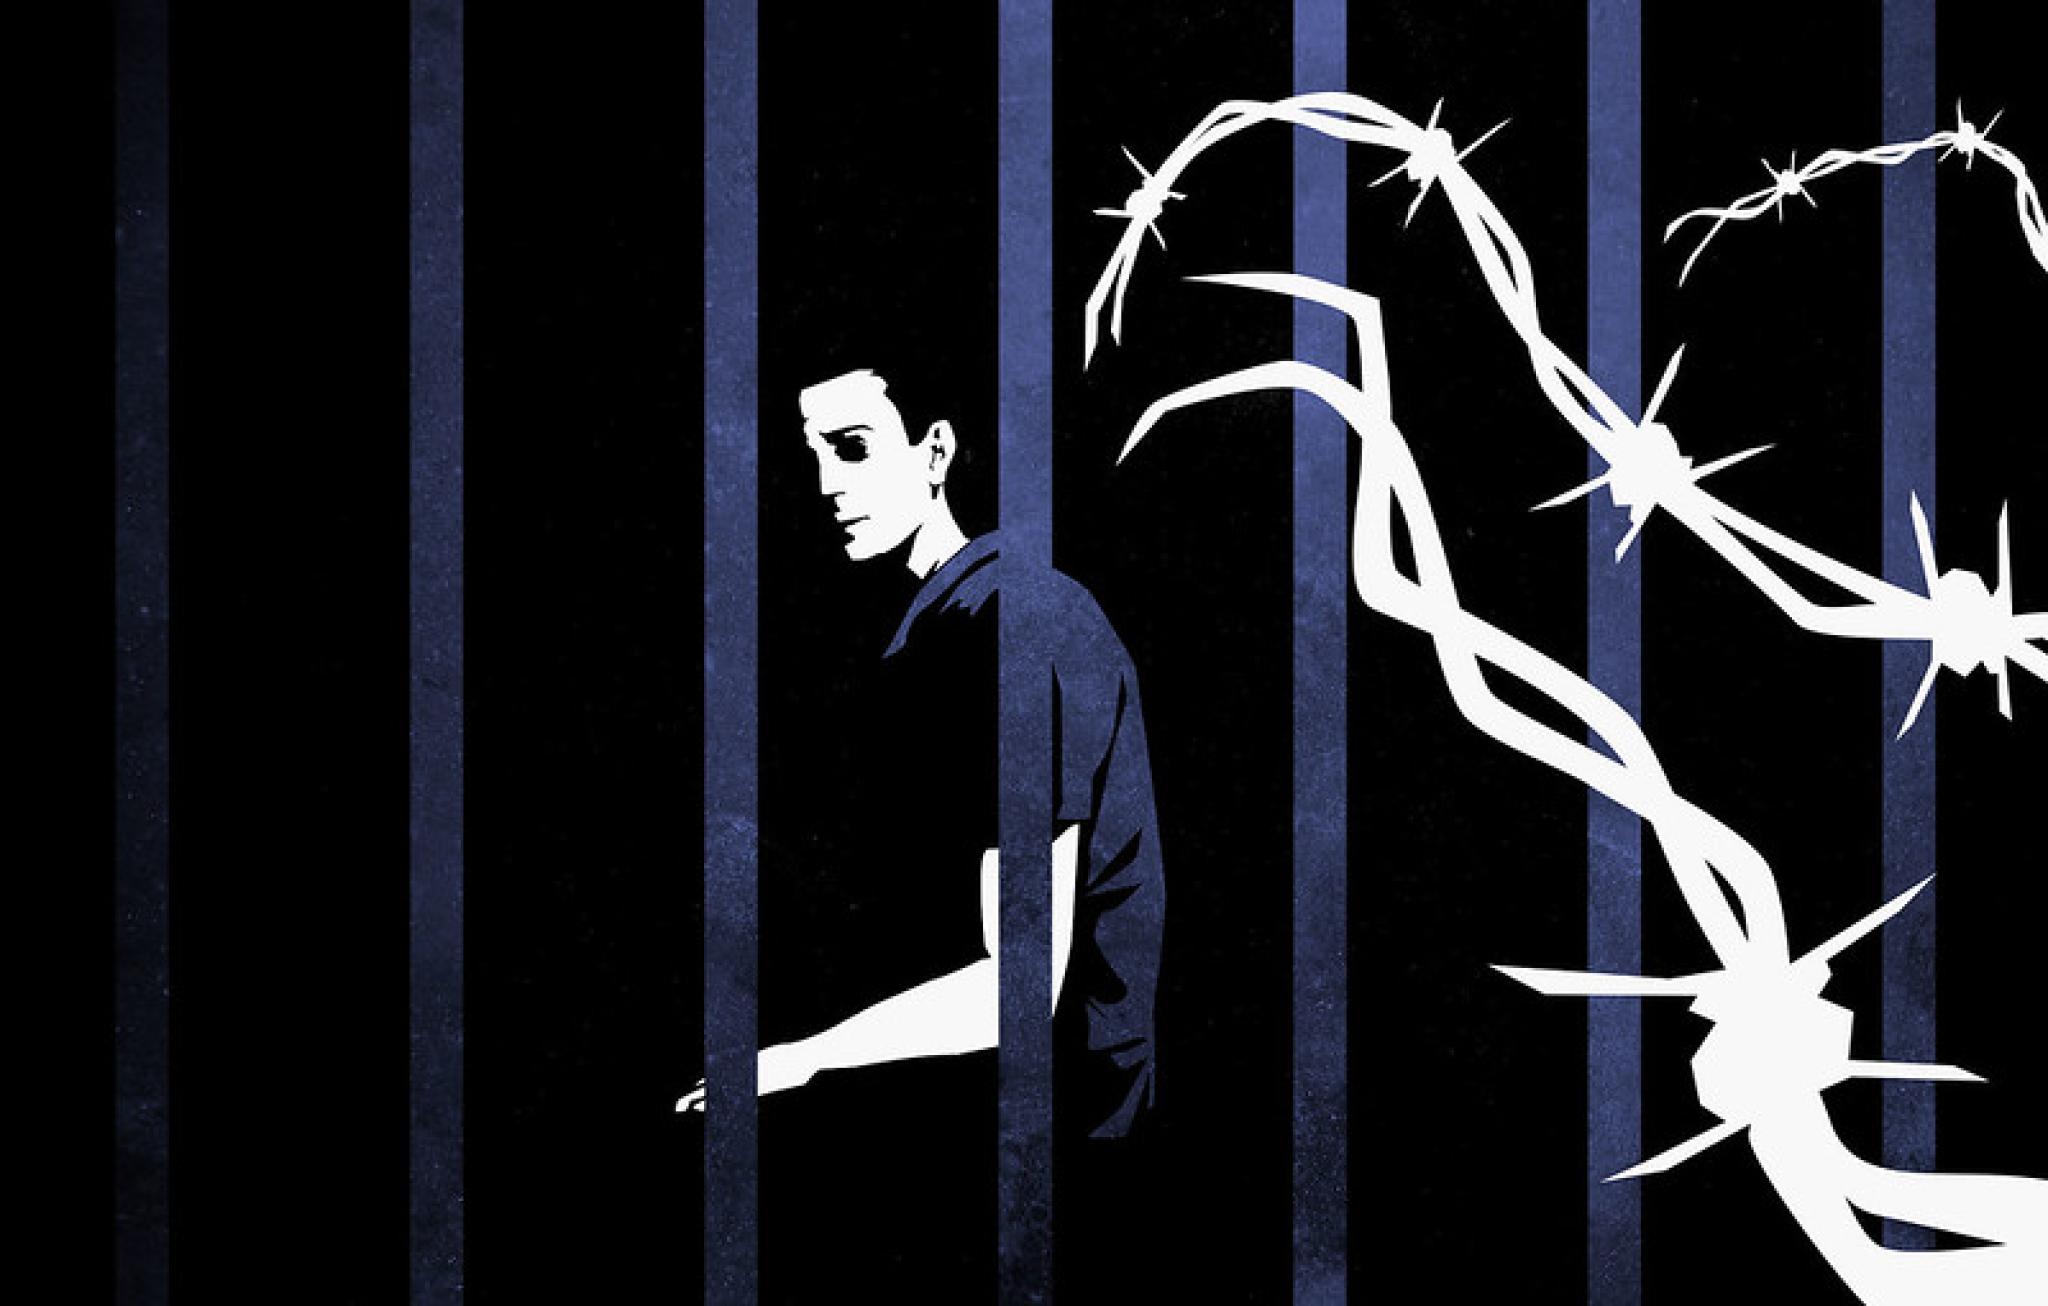 Image credit: stylized image of a prisoner behind bars and barbed wire by Jared Rodriguez of Truthout from https://flic.kr/p/2hdA8J3 (CC BY-NC-ND 2.0) 